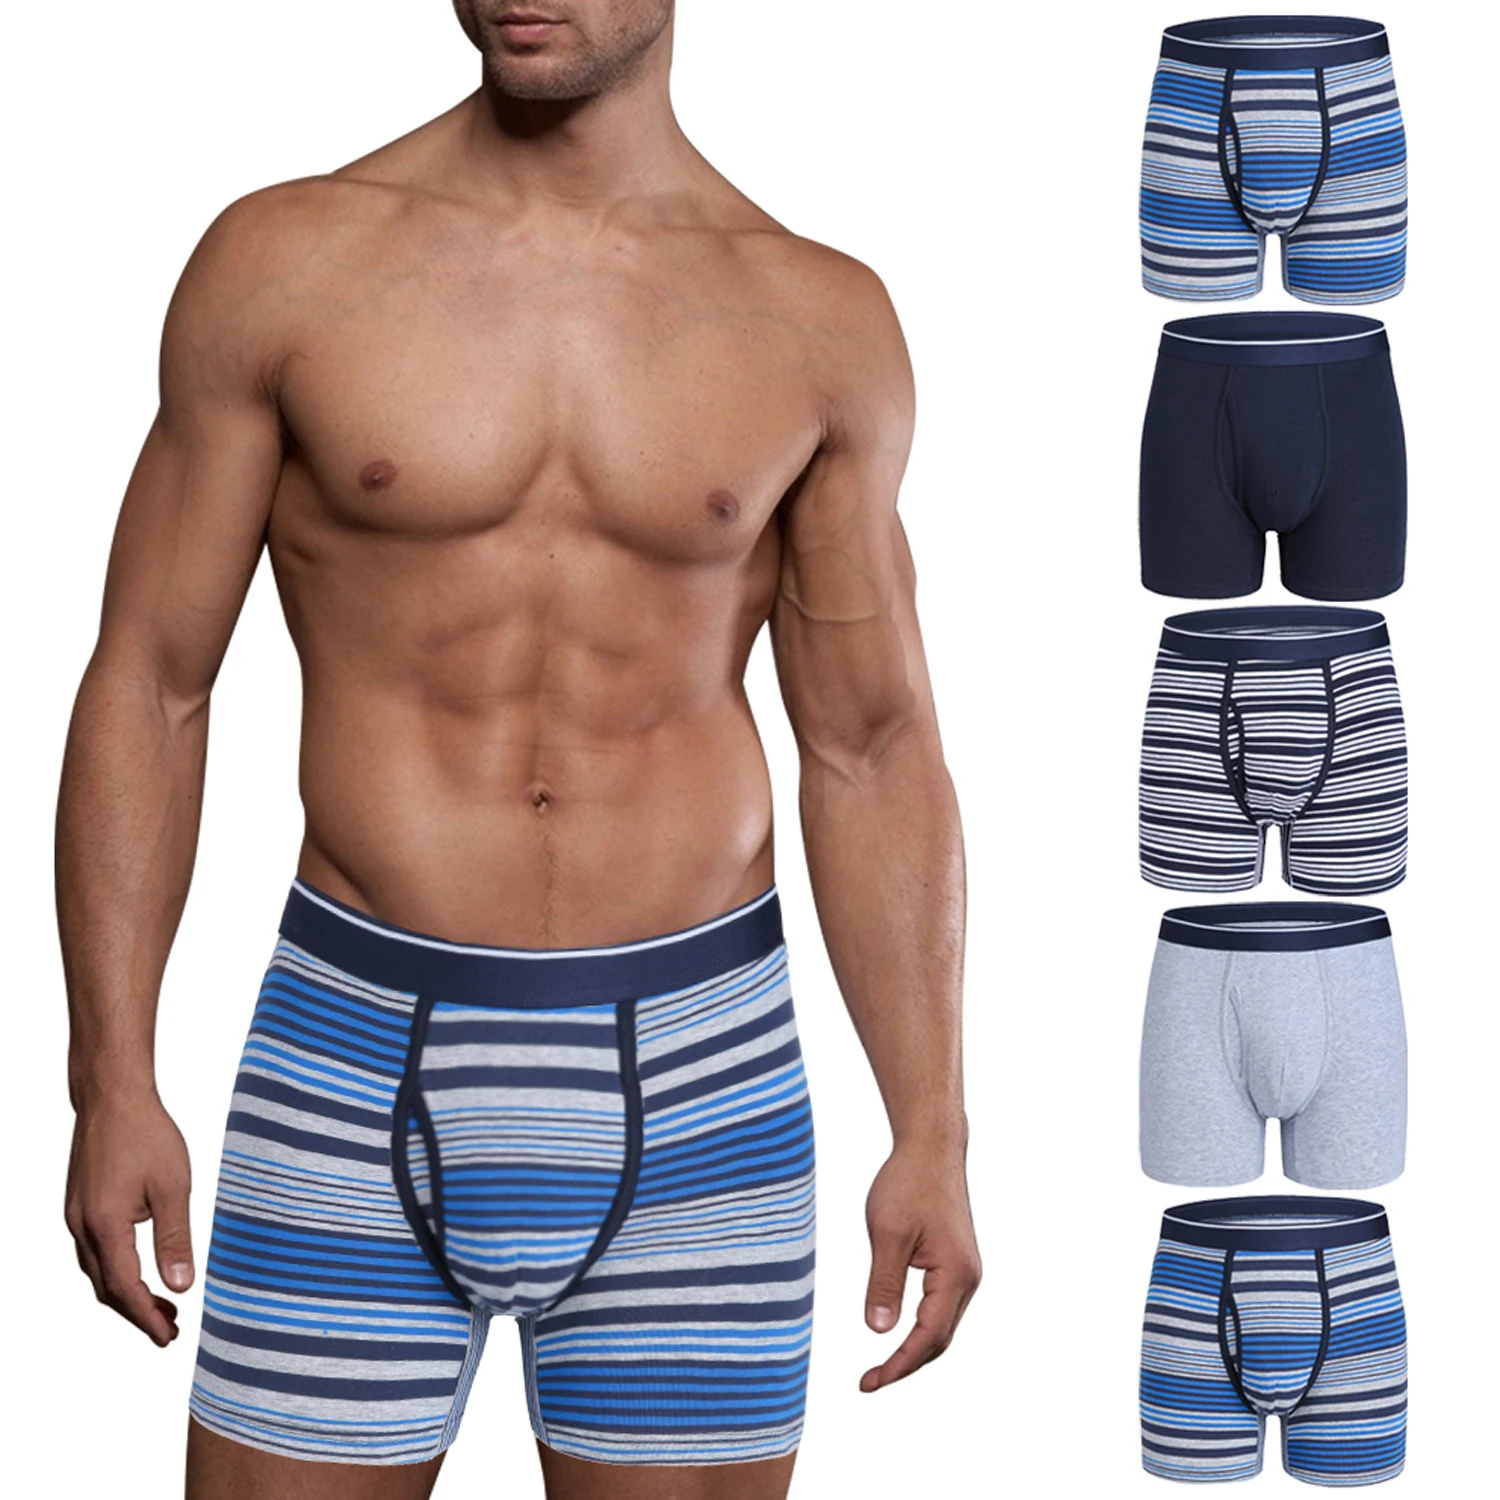 

Hot sale in Amanzon cotton/spandex stripes comfortable men underwear boxer brief for daily used